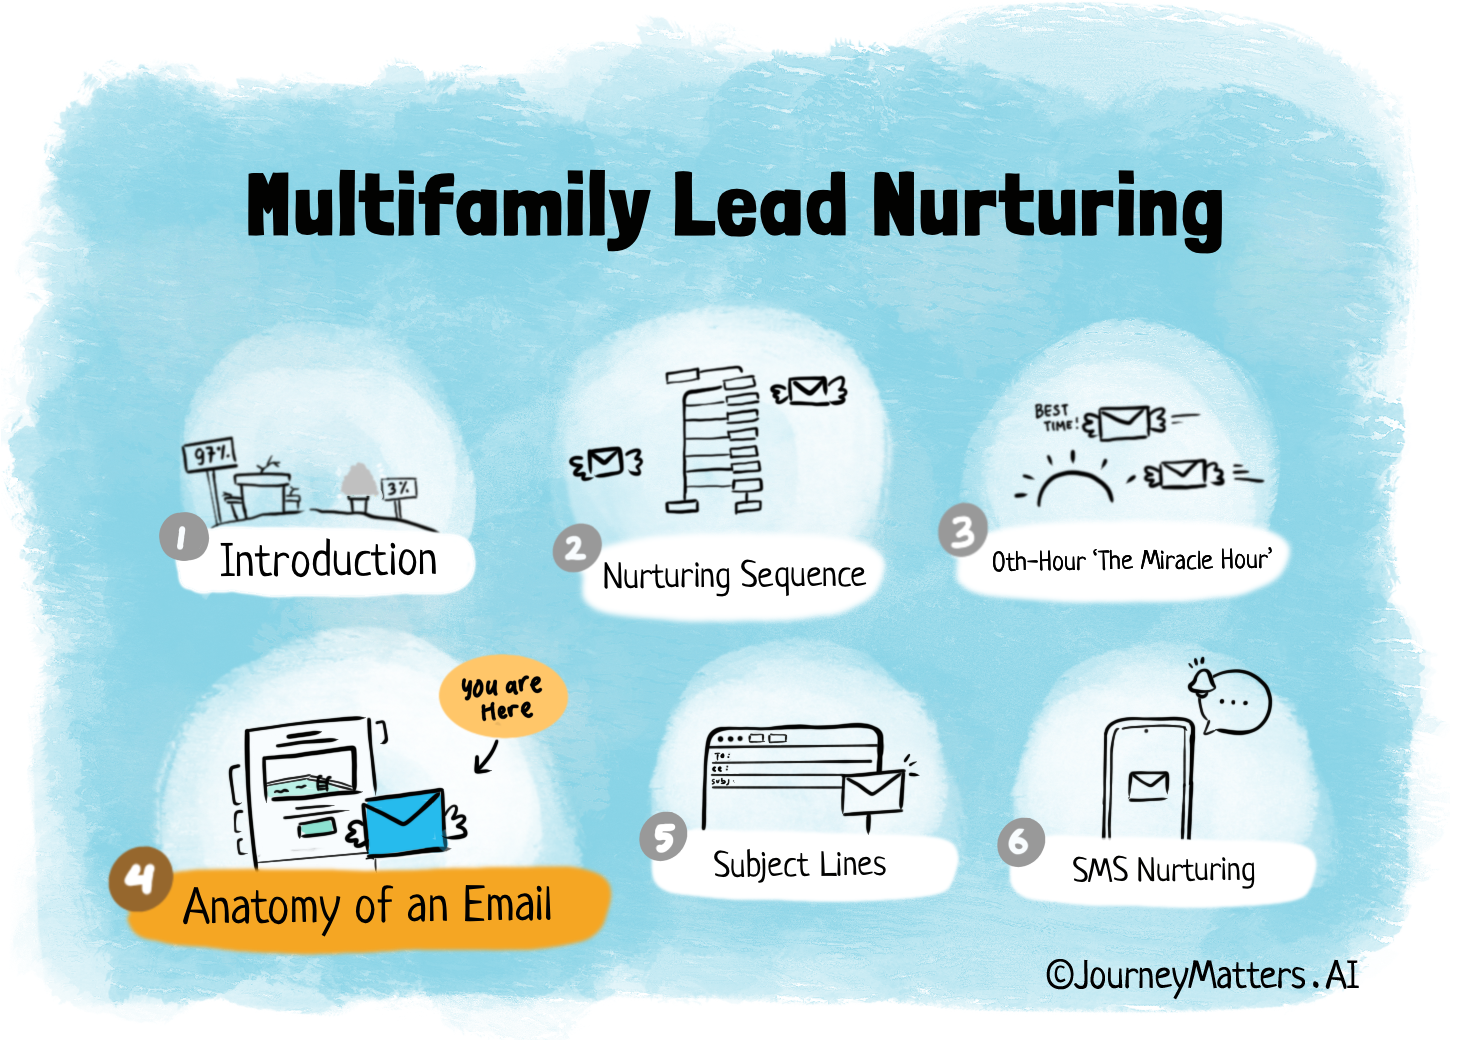 Multifamily lead nurturing series article 4, the anatomy of an email